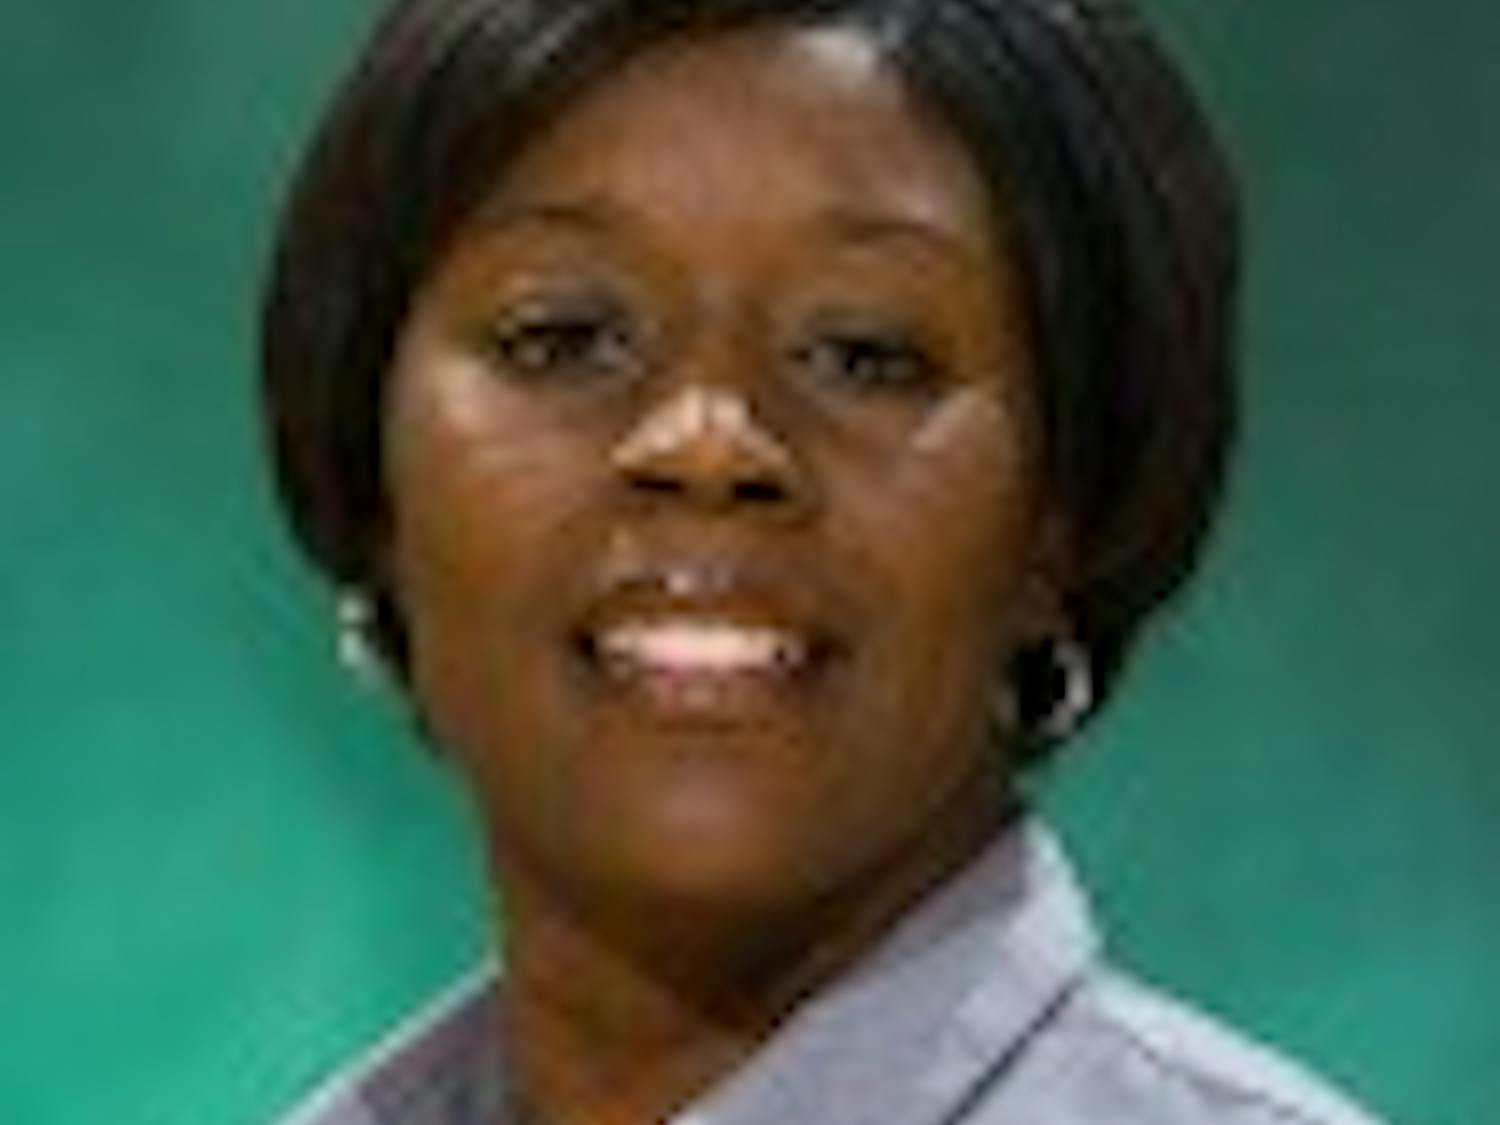 Women's Basketball: Ohio Athletics decides not to renew Randall's contract  